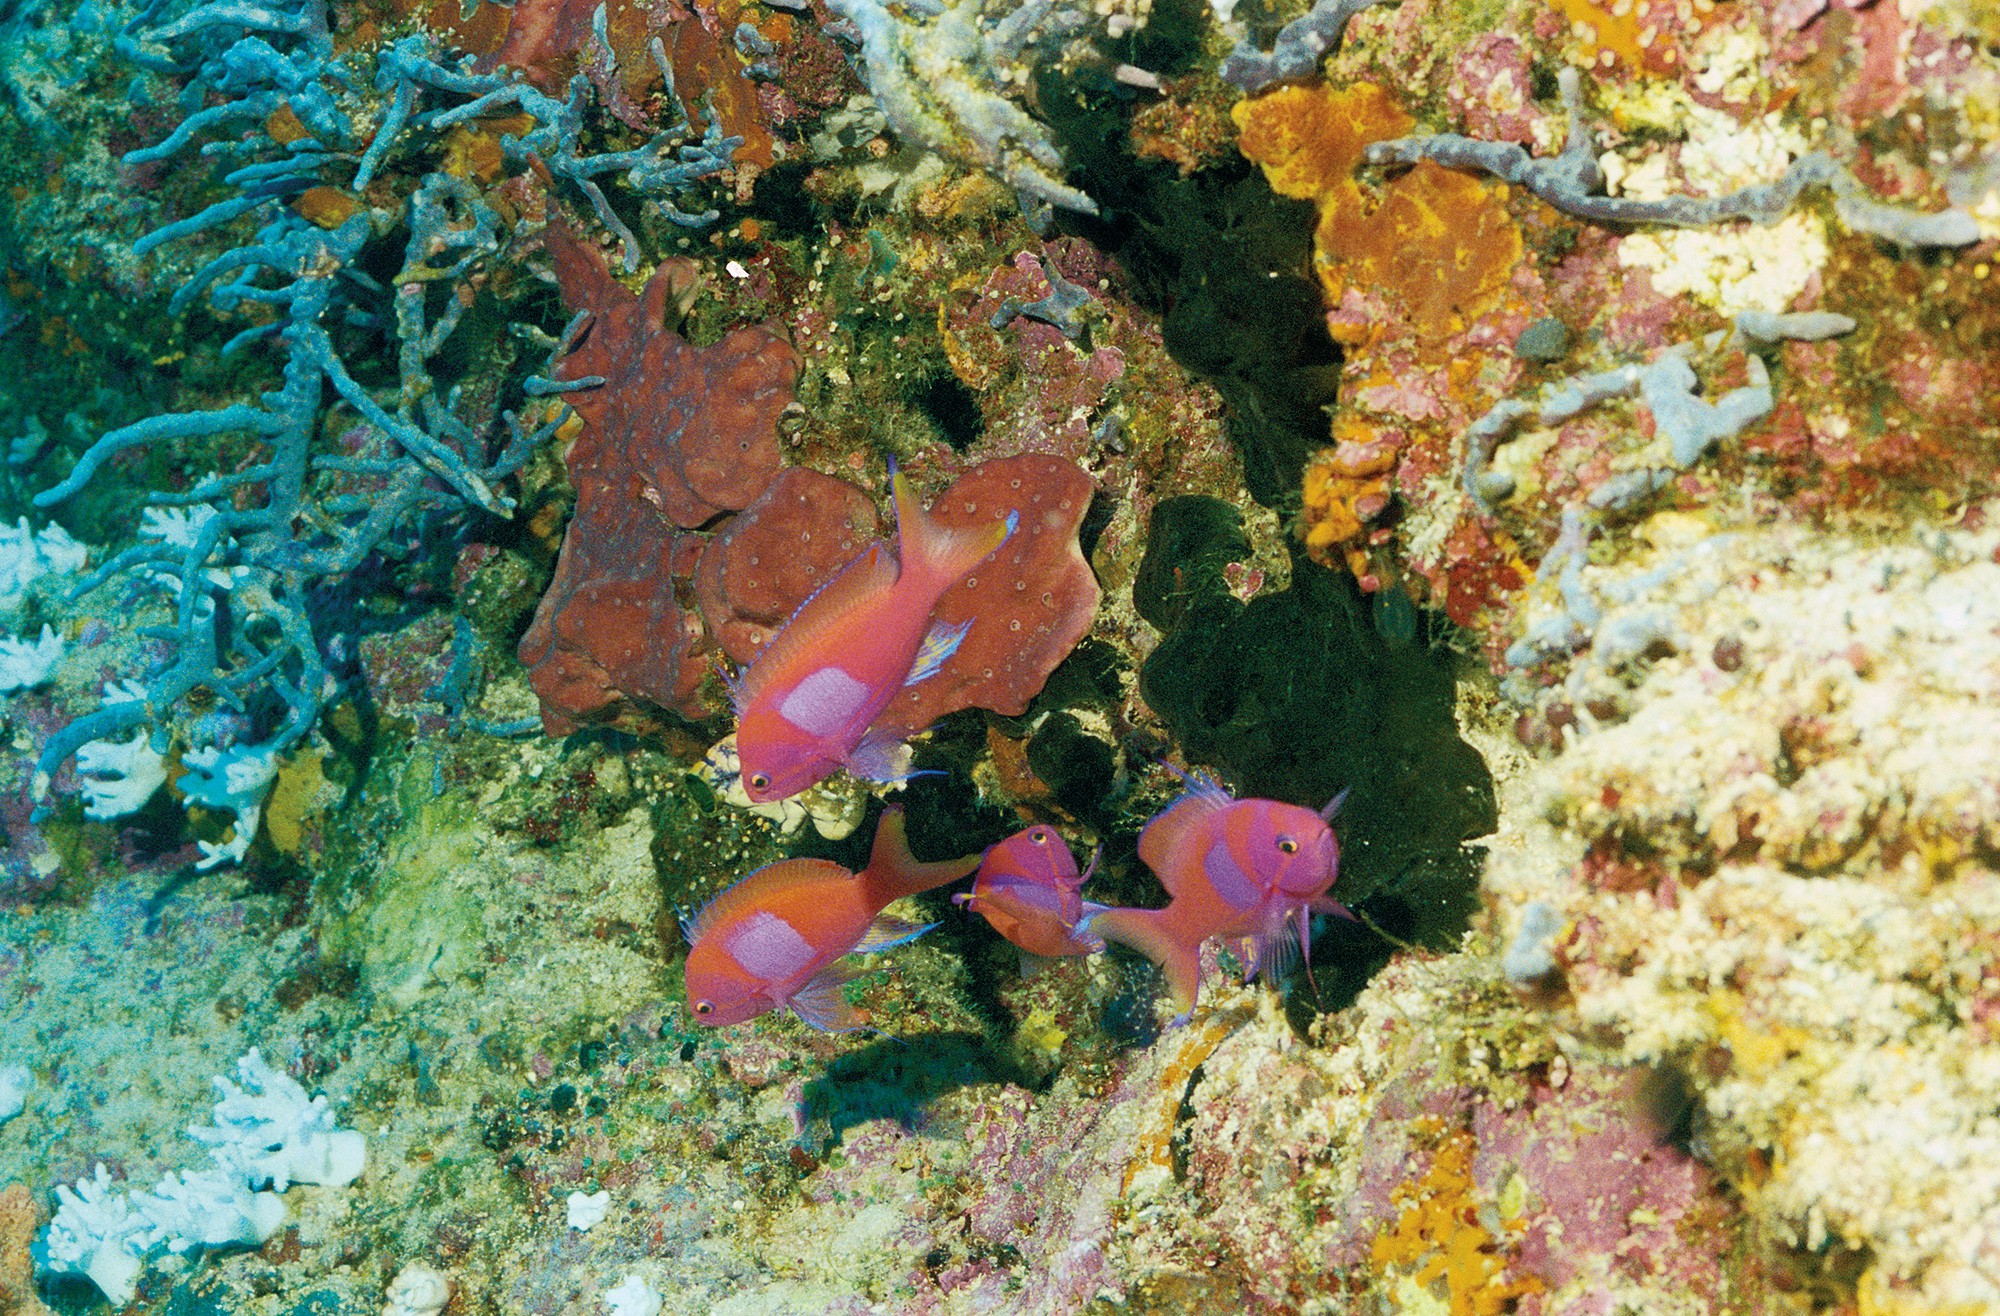 Photograph of Squarespot Anthias in Papau, New Guinea by Sam Johnson